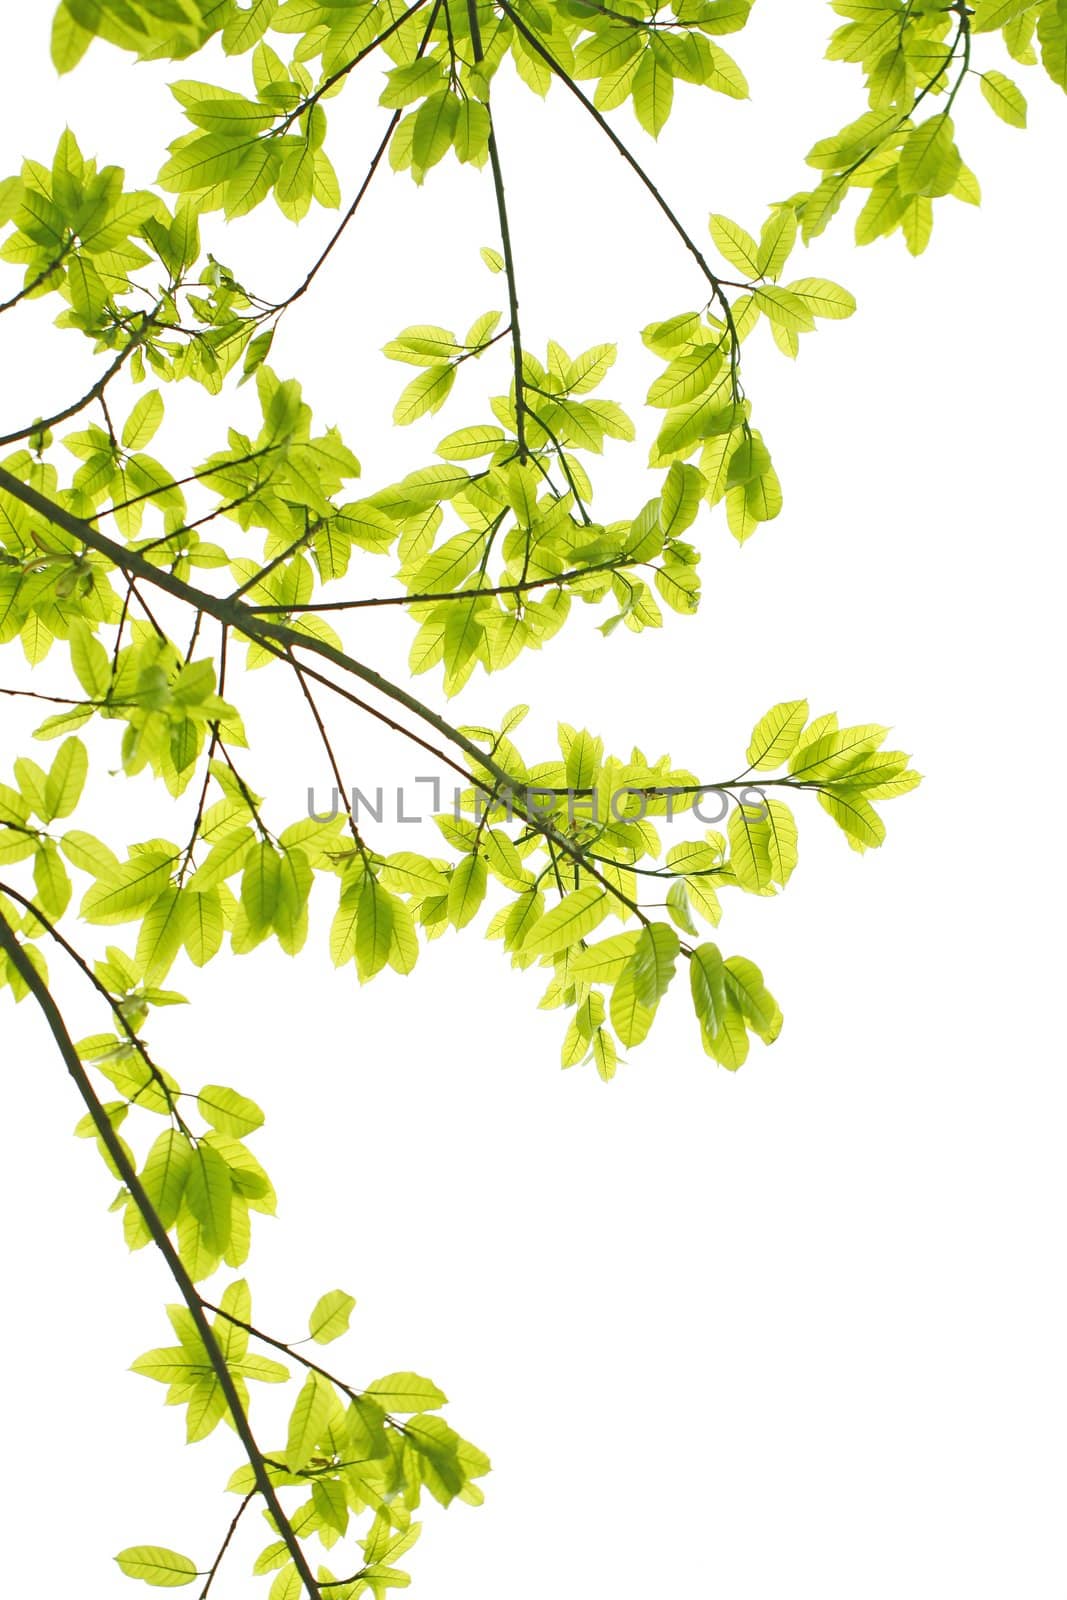 Green leaves background by kawing921